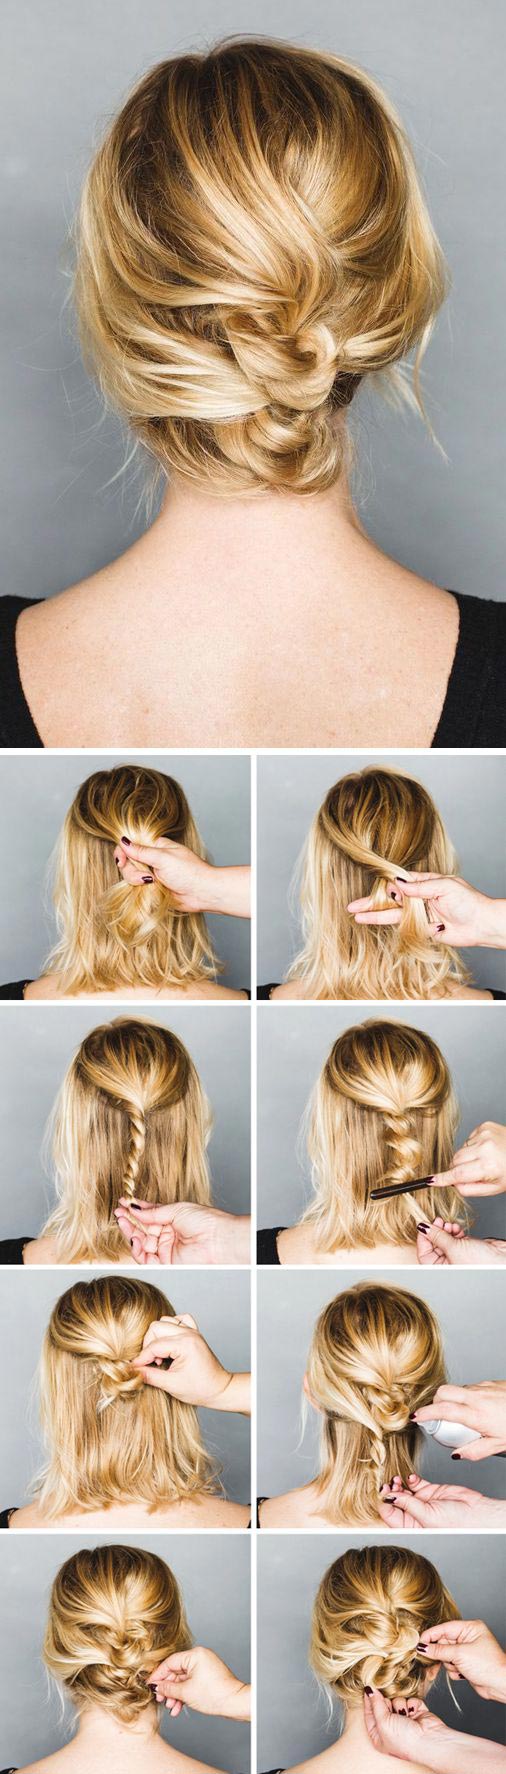 Top 10 Messy Updo Tutorials For Different Hair Lengths